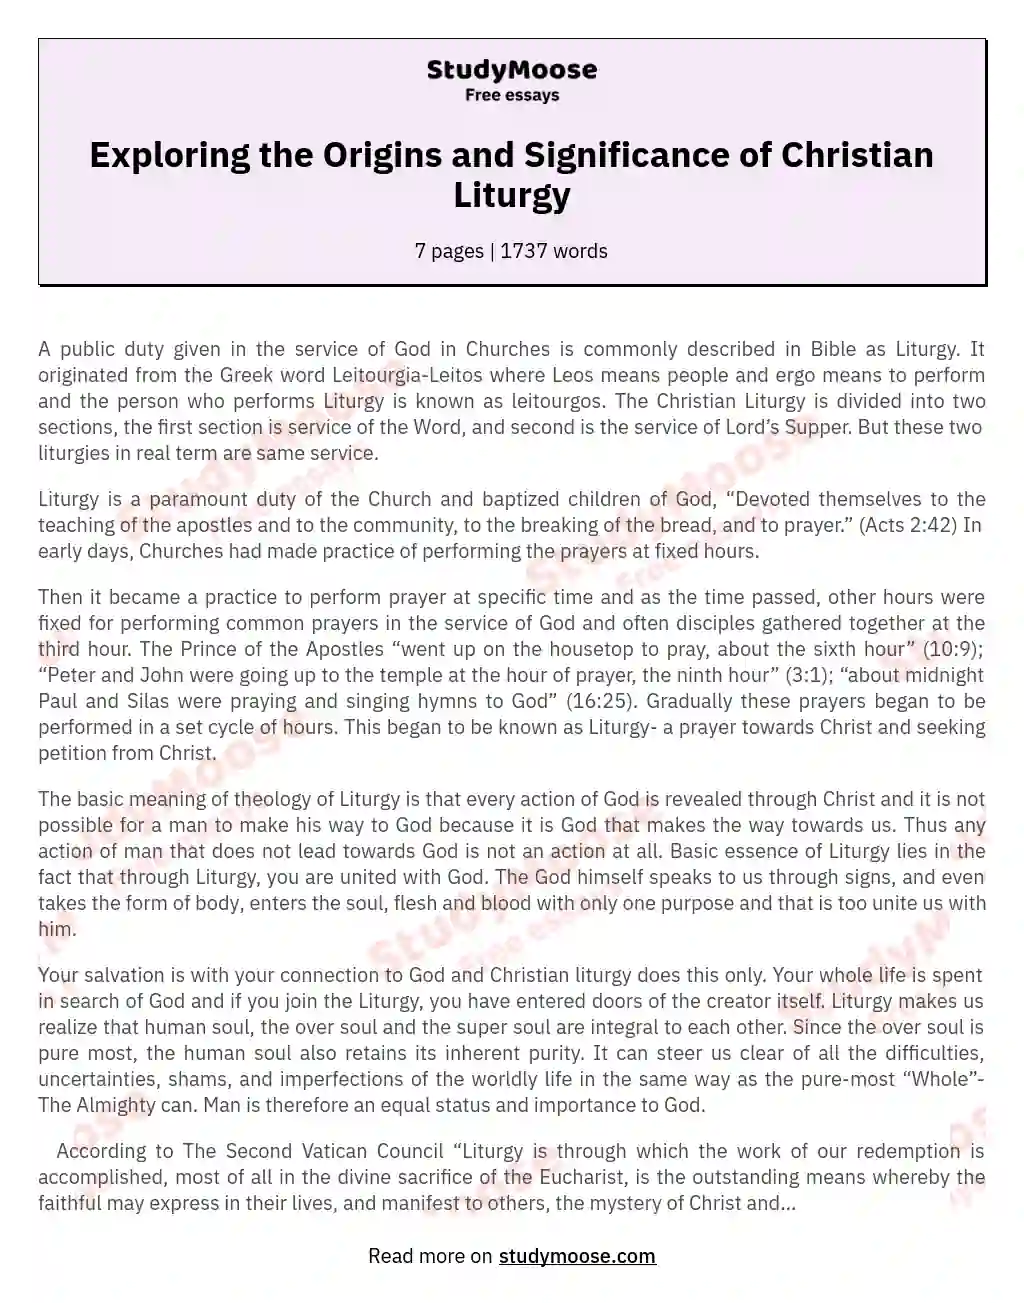 Exploring the Origins and Significance of Christian Liturgy essay